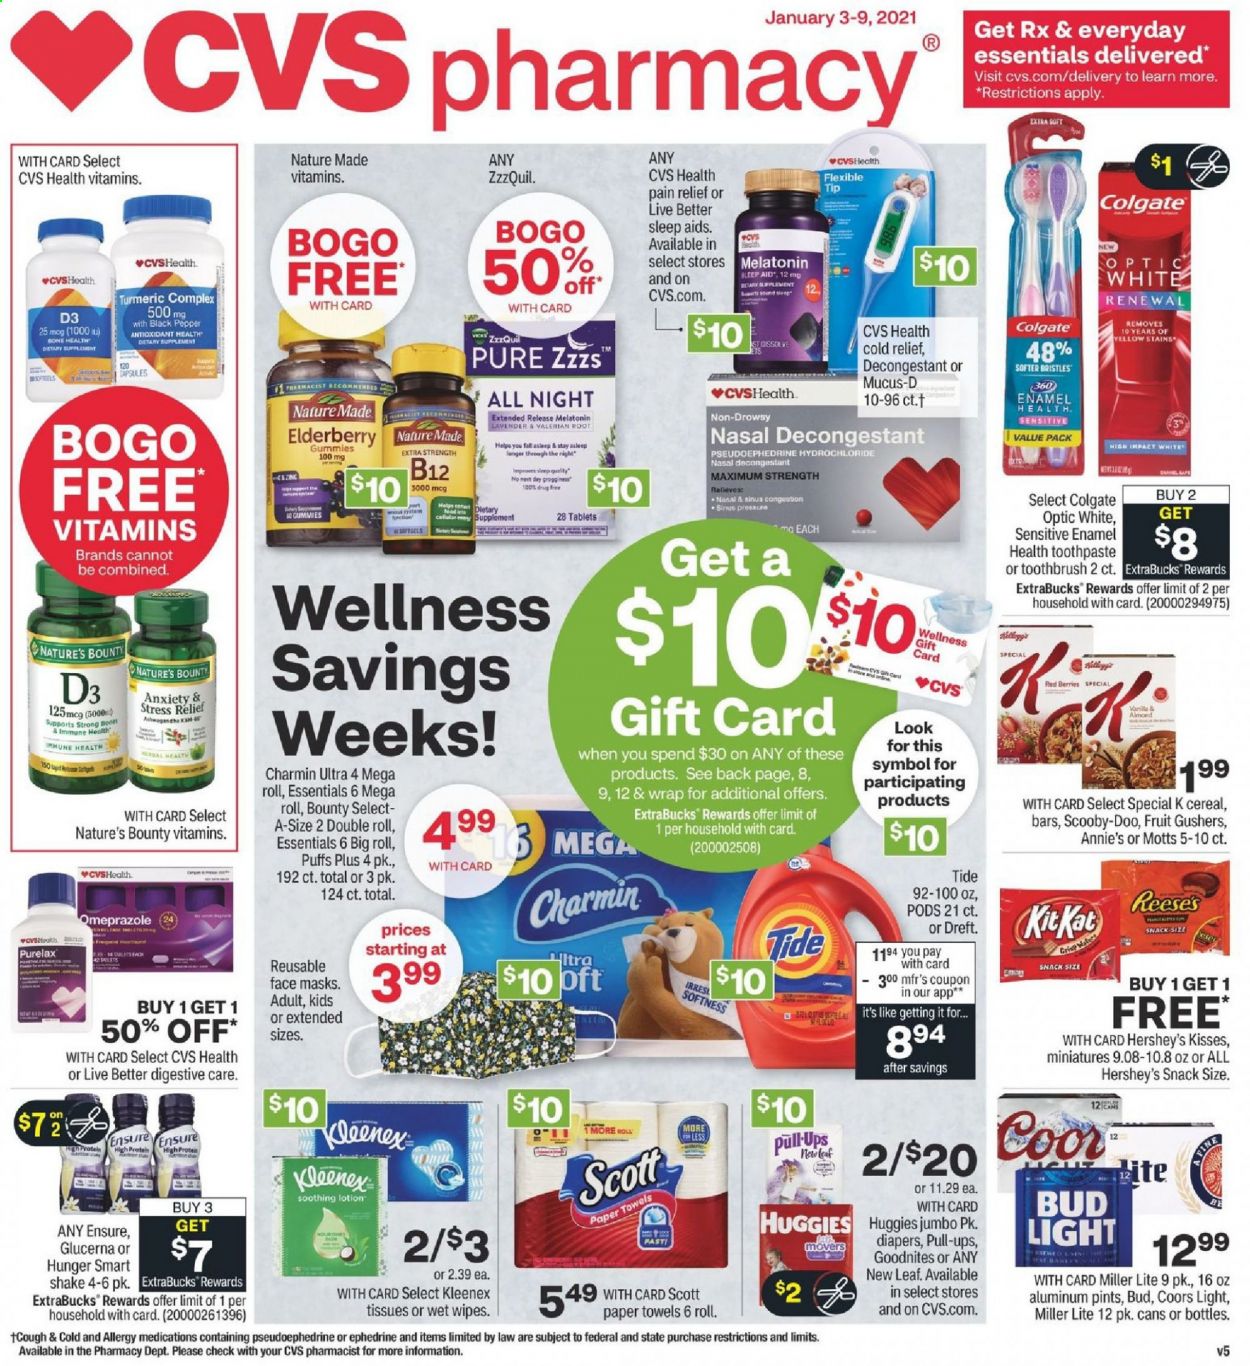 thumbnail - CVS Pharmacy Flyer - 01/03/2021 - 01/09/2021 - Sales products - Annie's, shake, Reese's, Hershey's, Bounty, Digestive, snack, cereals, almonds, Mott's, Huggies, Kleenex, tissues, kitchen towels, paper towels, Charmin, wipes, Tide, Colgate, toothbrush, toothpaste, Purelax, body lotion, Scott, pain relief, Melatonin, Nature Made, Nature's Bounty, ZzzQuil, Glucerna, zinc, vitamin D3, face mask, beer, Miller Lite, Coors, Bud Light. Page 1.